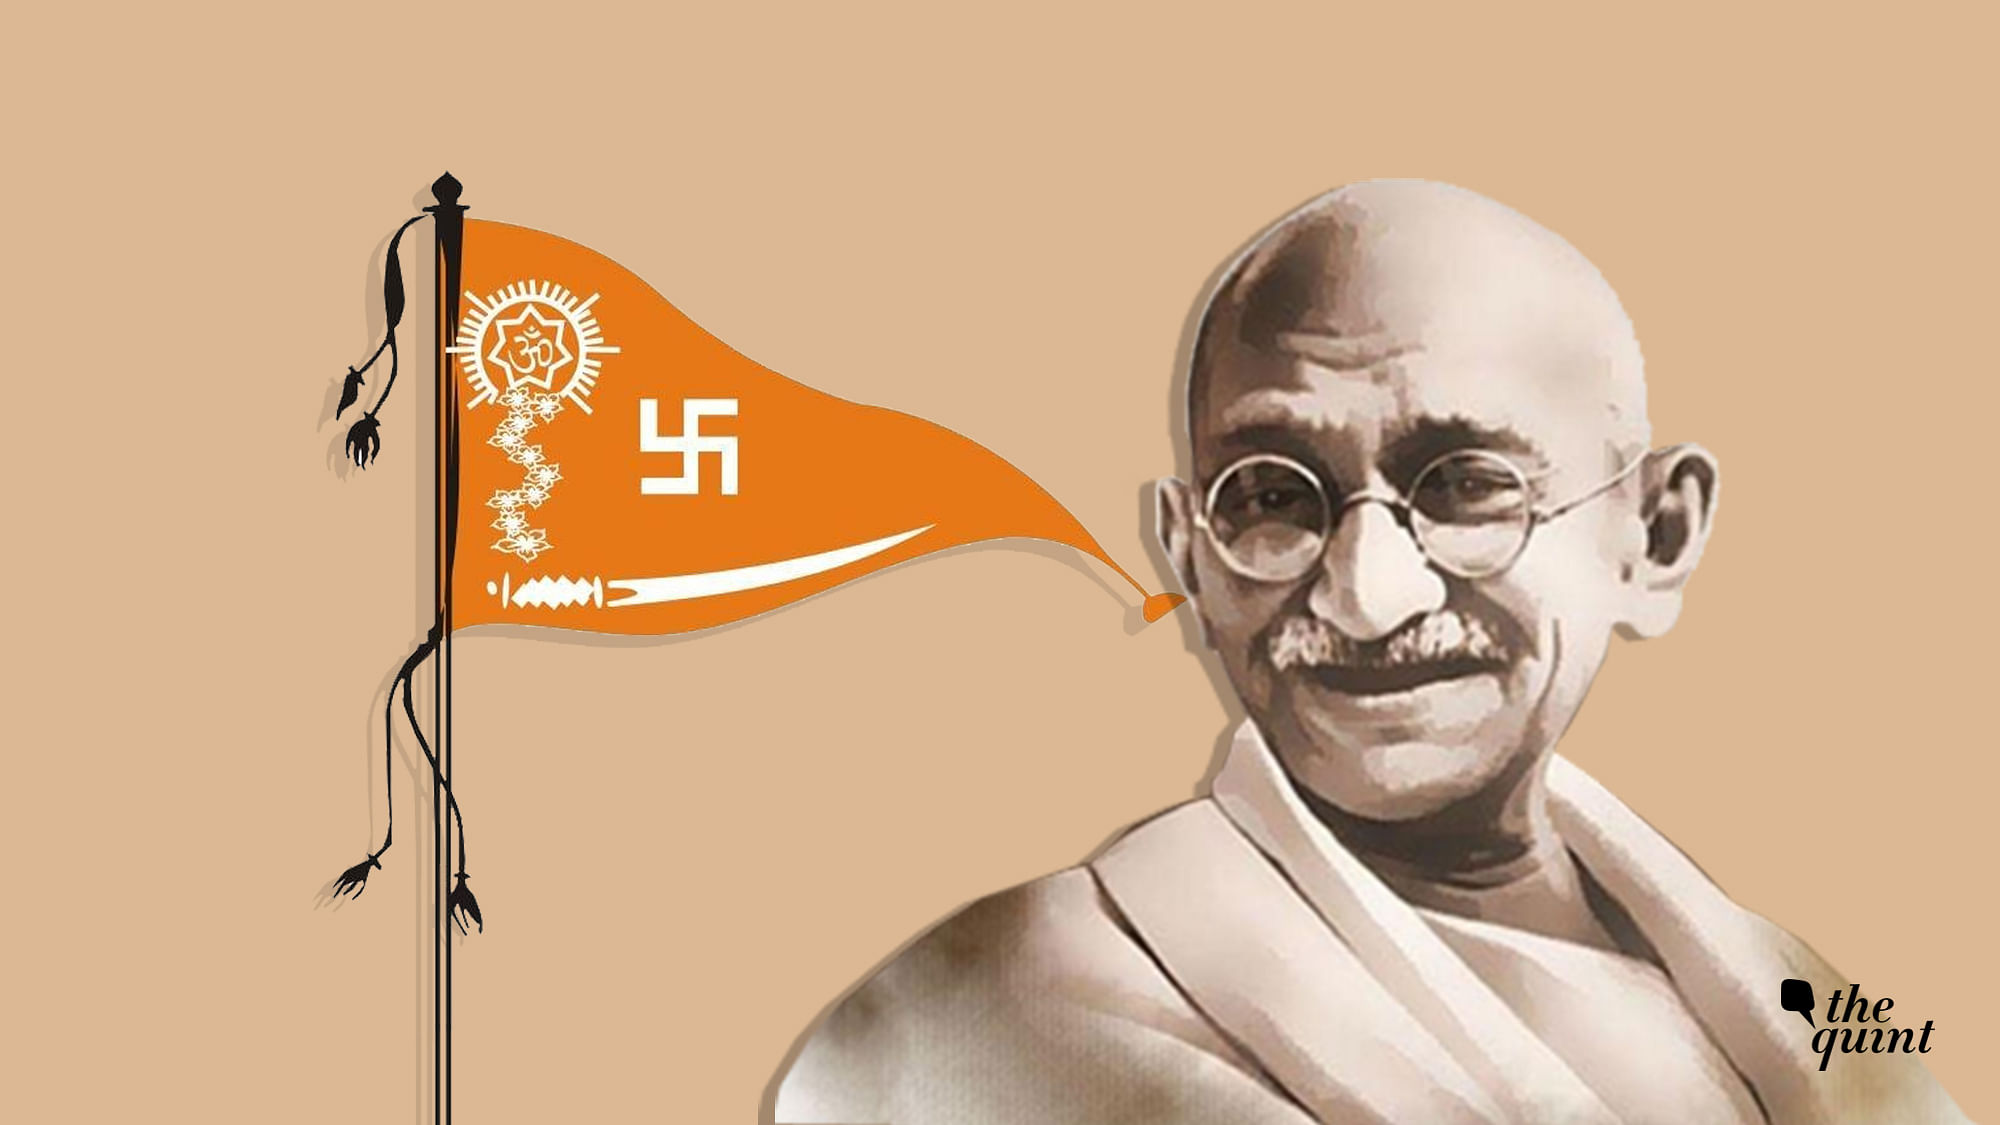 Image of Hindu Mahasabha flag and Gandhi used for representational purposes. The right-wing group recently ‘celebrated’ the death anniversary of Gandhi by re-enacting his assassination.